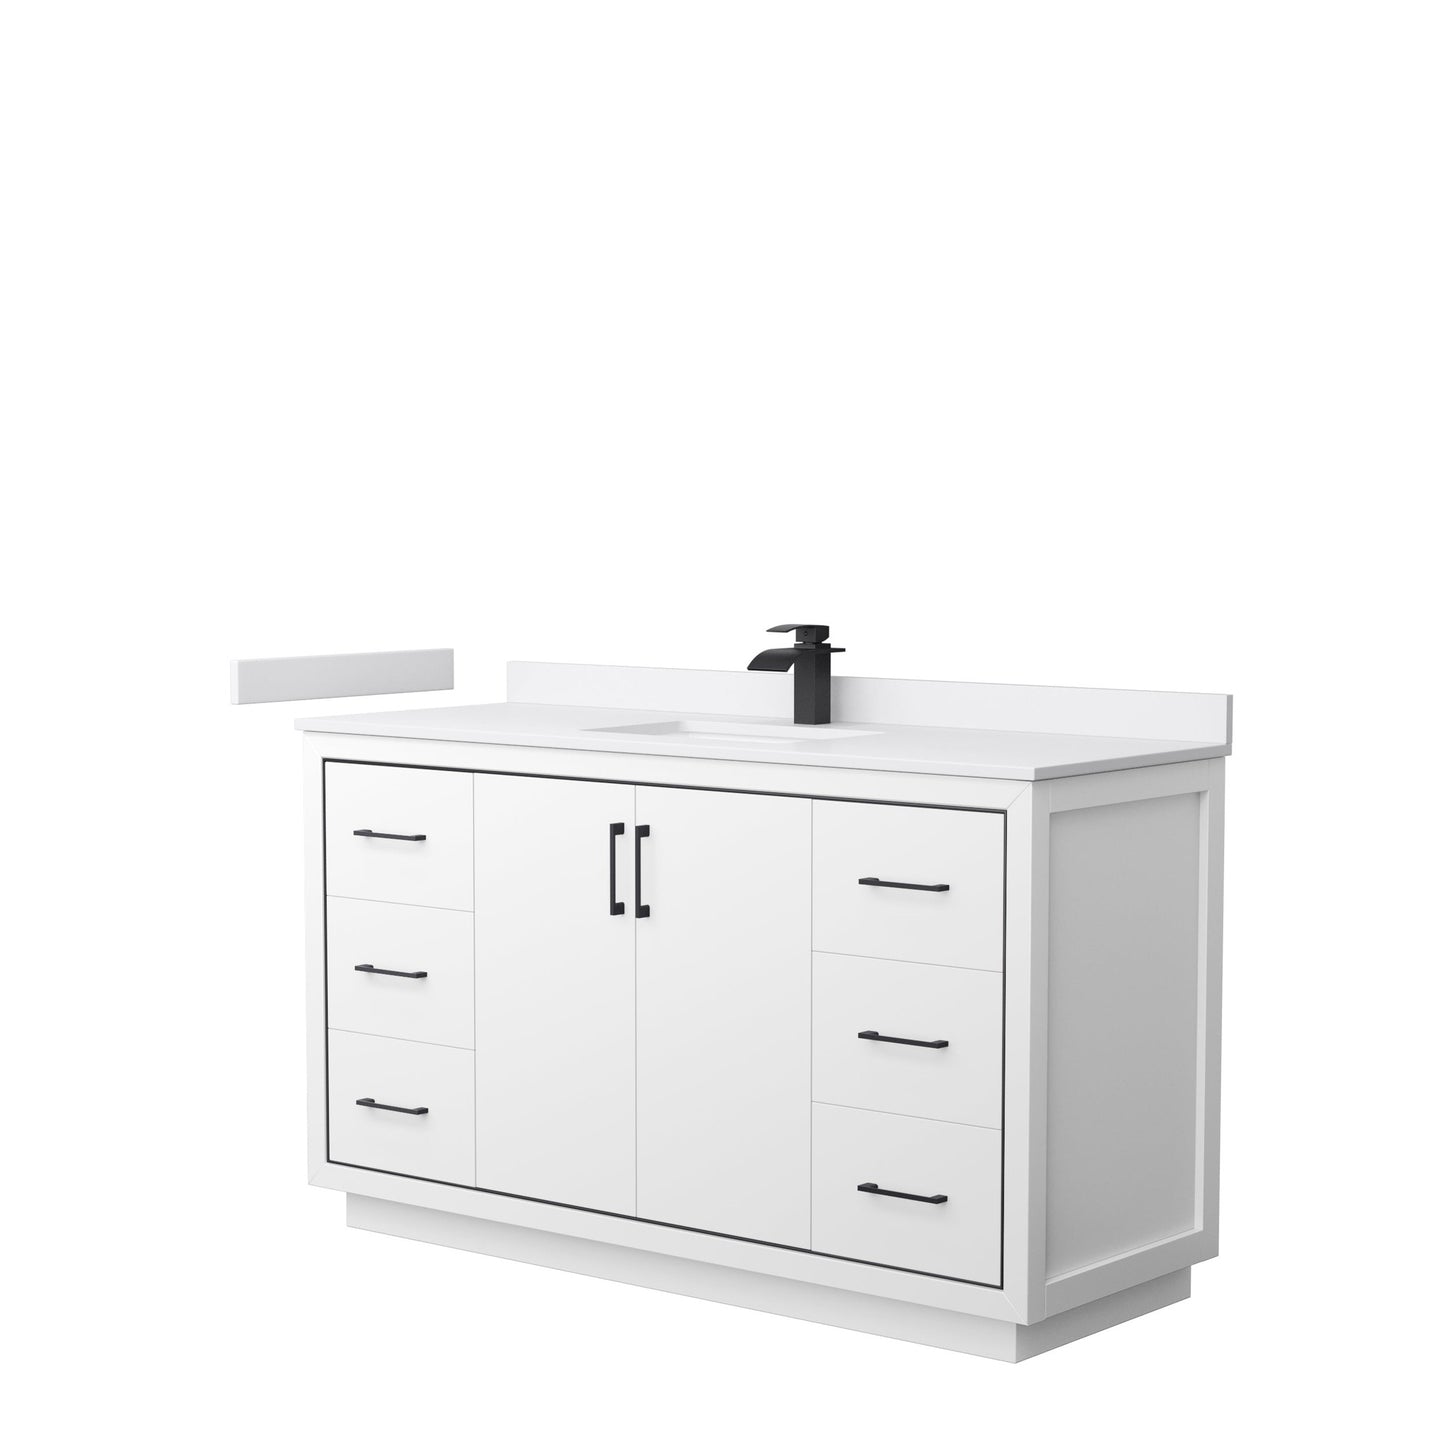 Wyndham Collection Icon 60" Single Bathroom Vanity in White, White Cultured Marble Countertop, Undermount Square Sink, Matte Black Trim